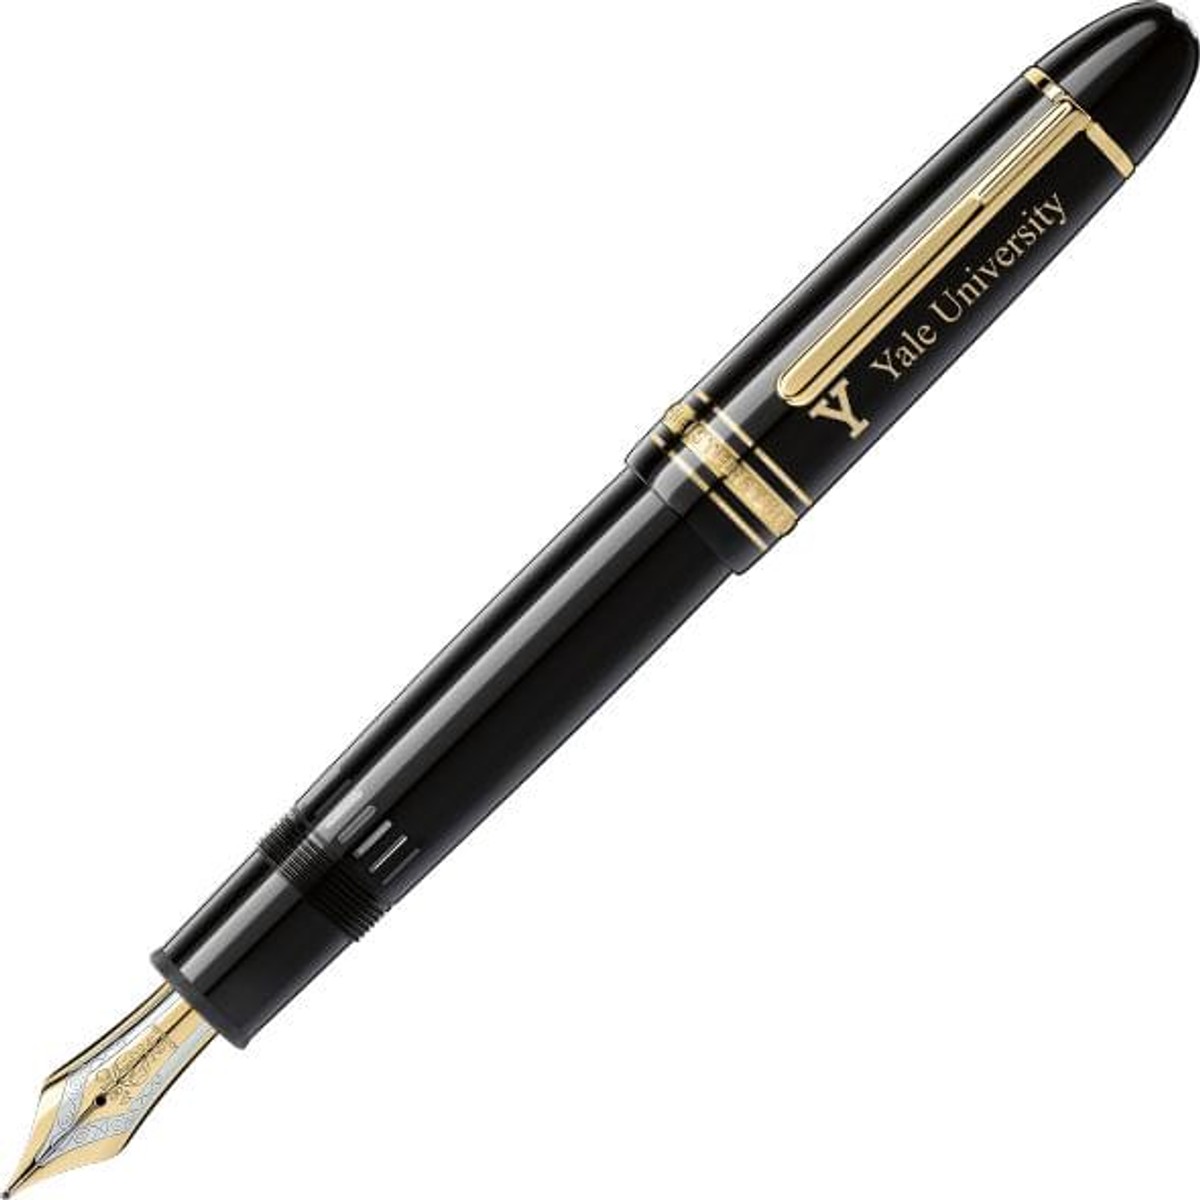 Alpha Sigma Tau Gold Pen with Black Block 4-Pack of Pens 